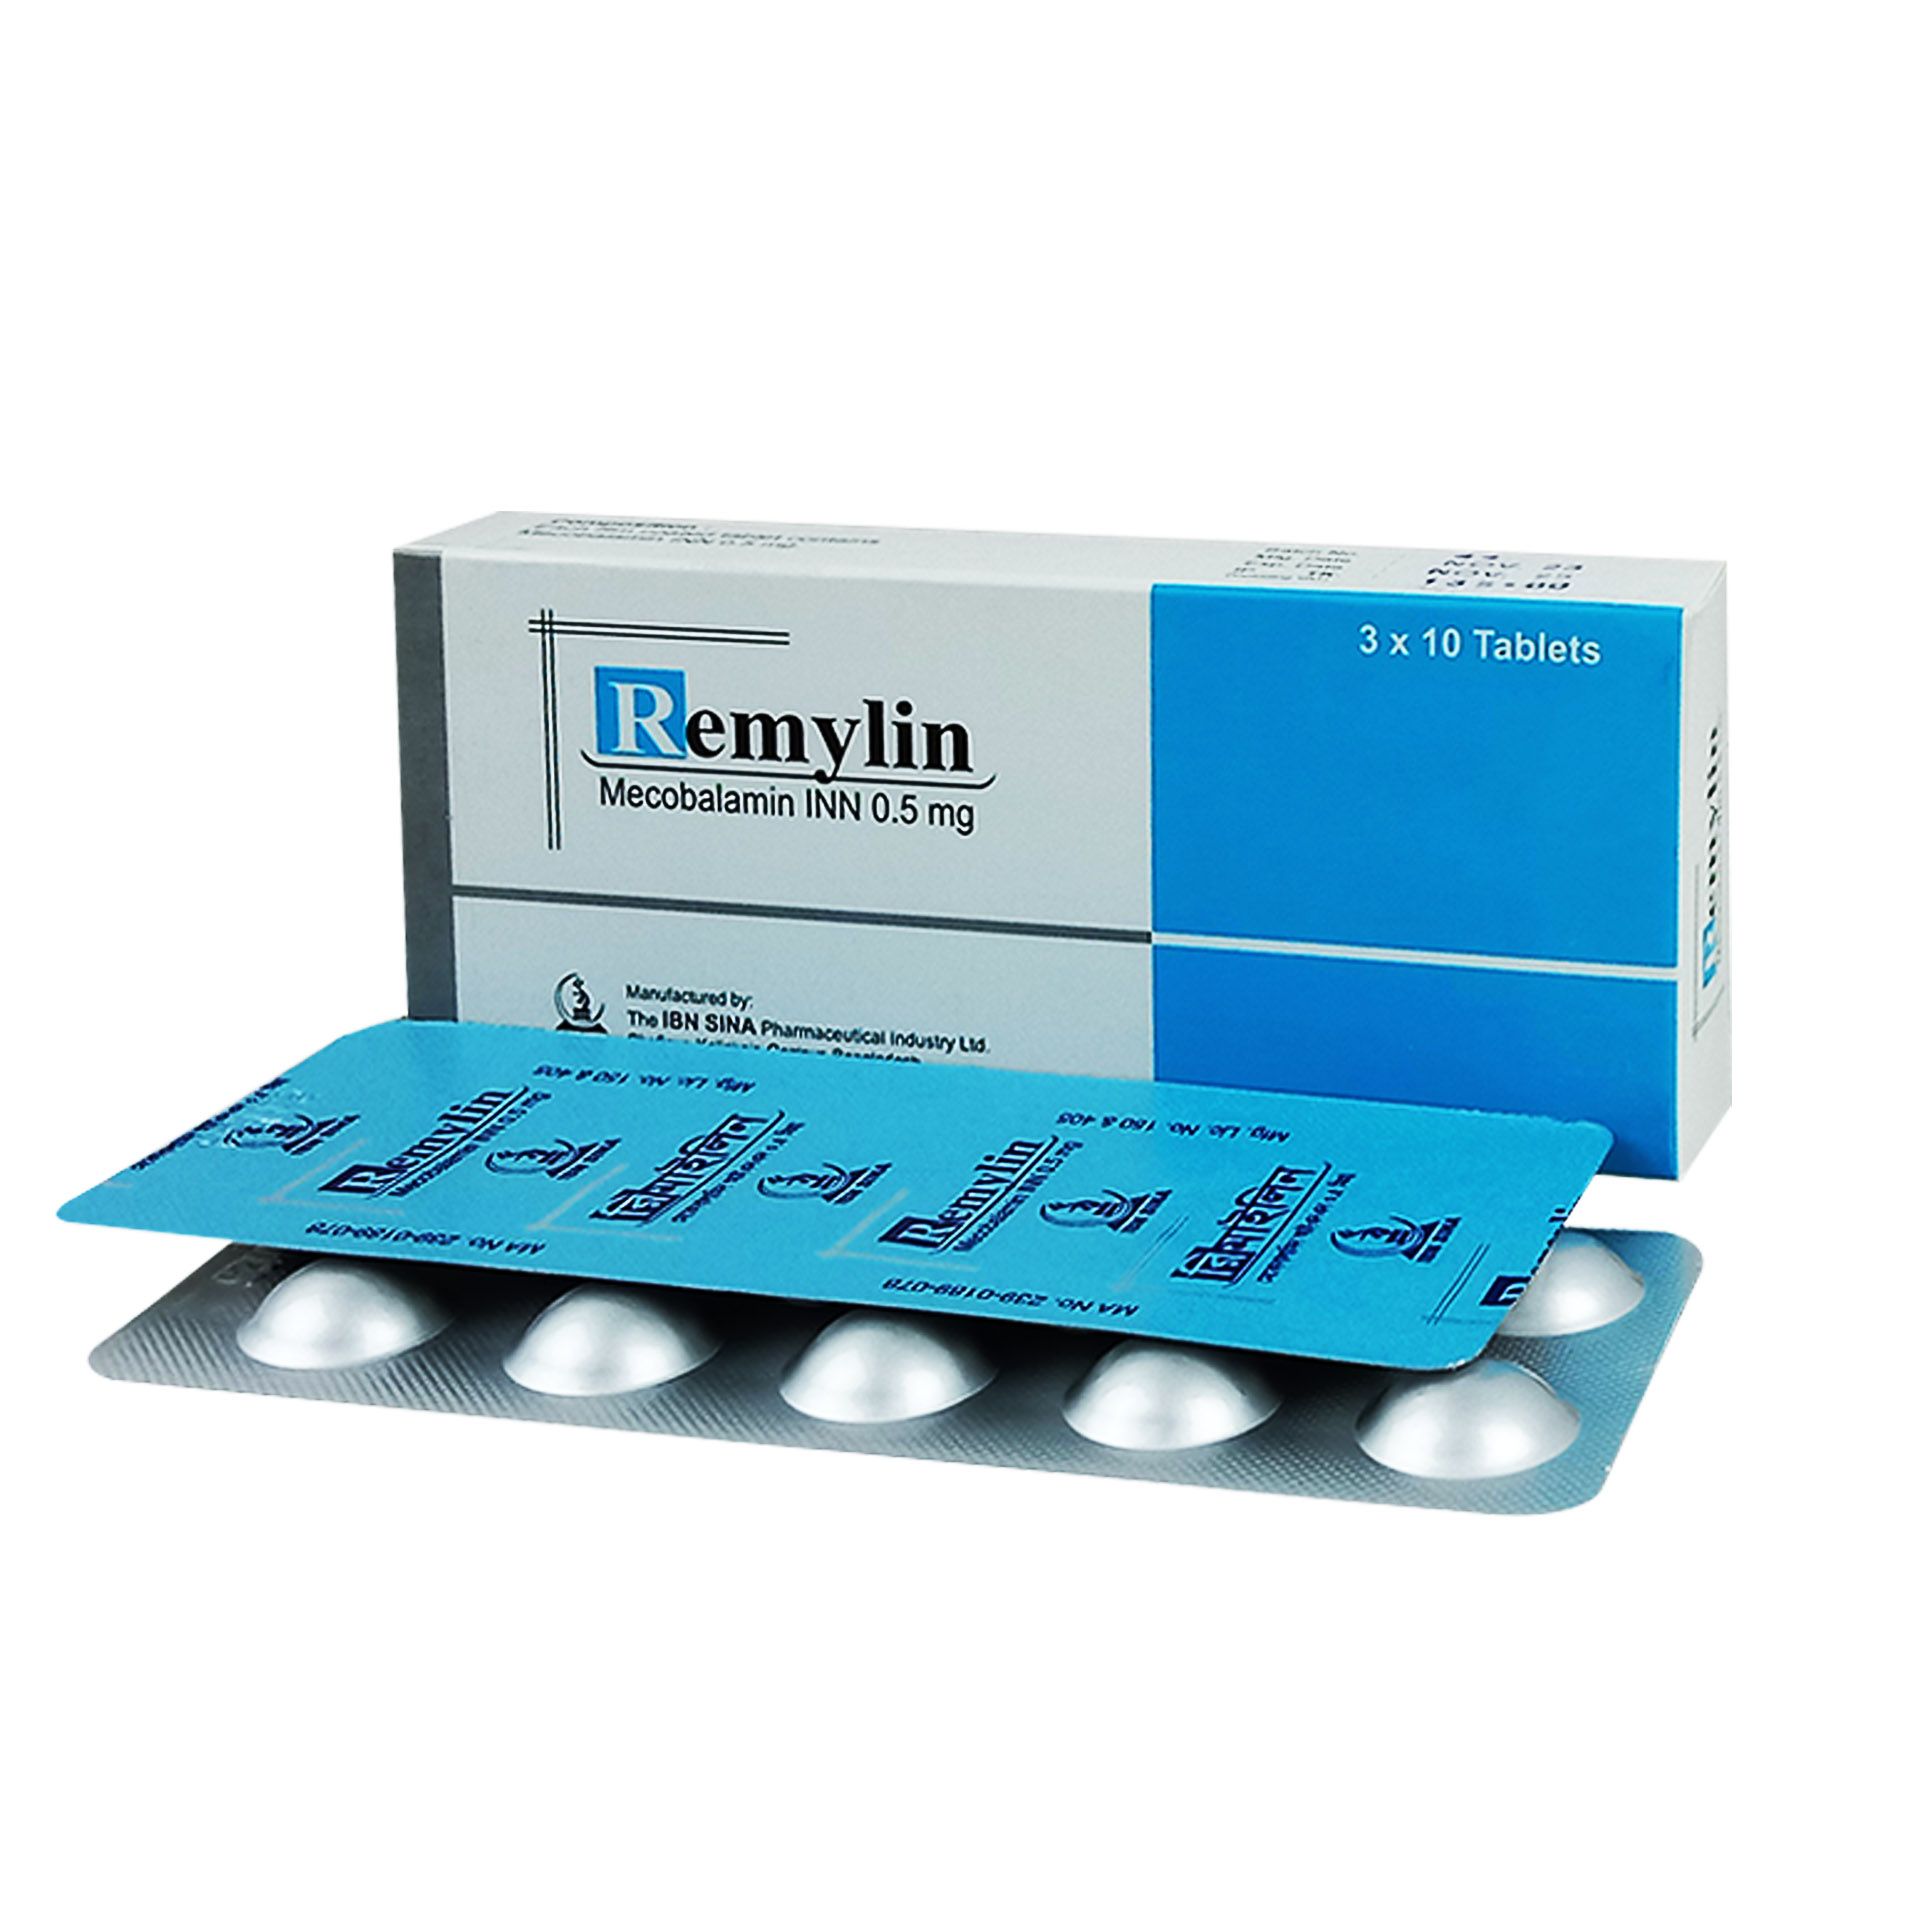 Remylin 0.5mg Tablet